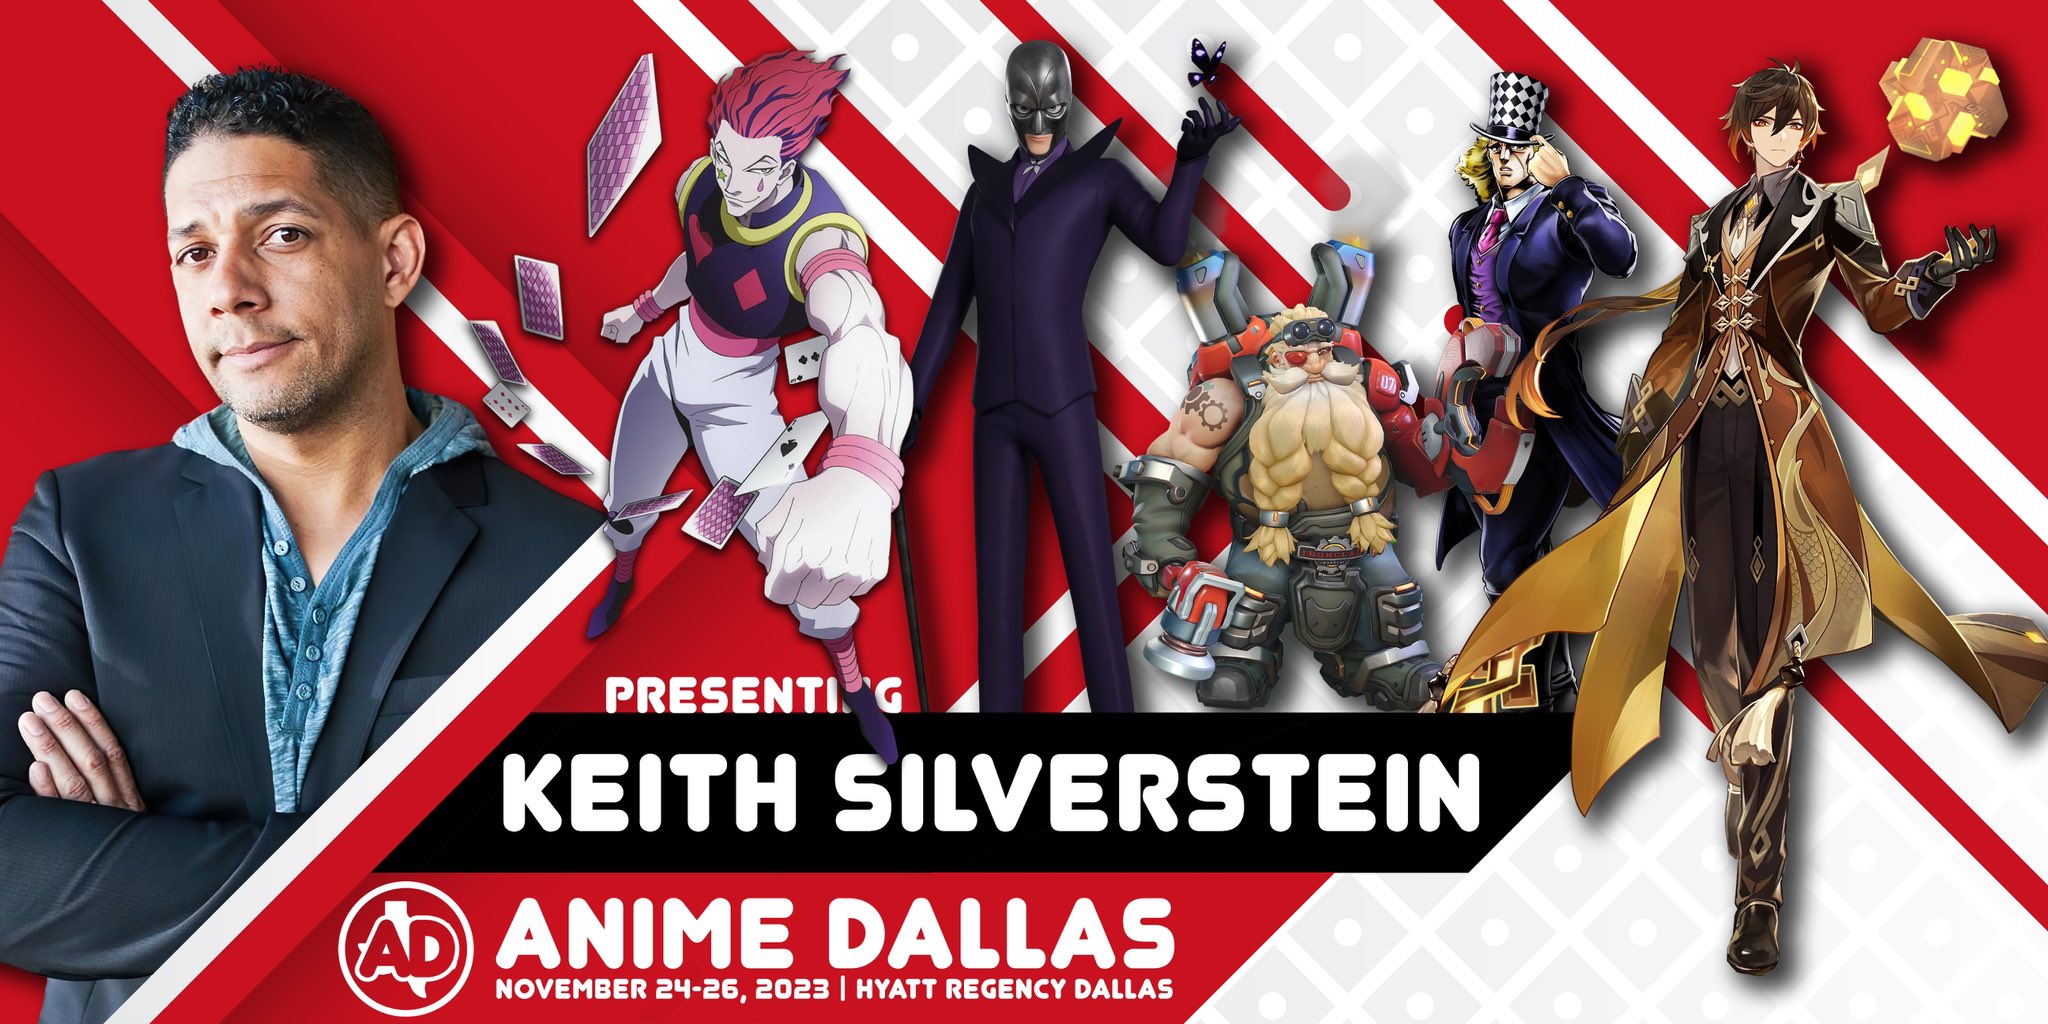 Come meet Keith Silverstein at Anime Pasadena 2023! You may know